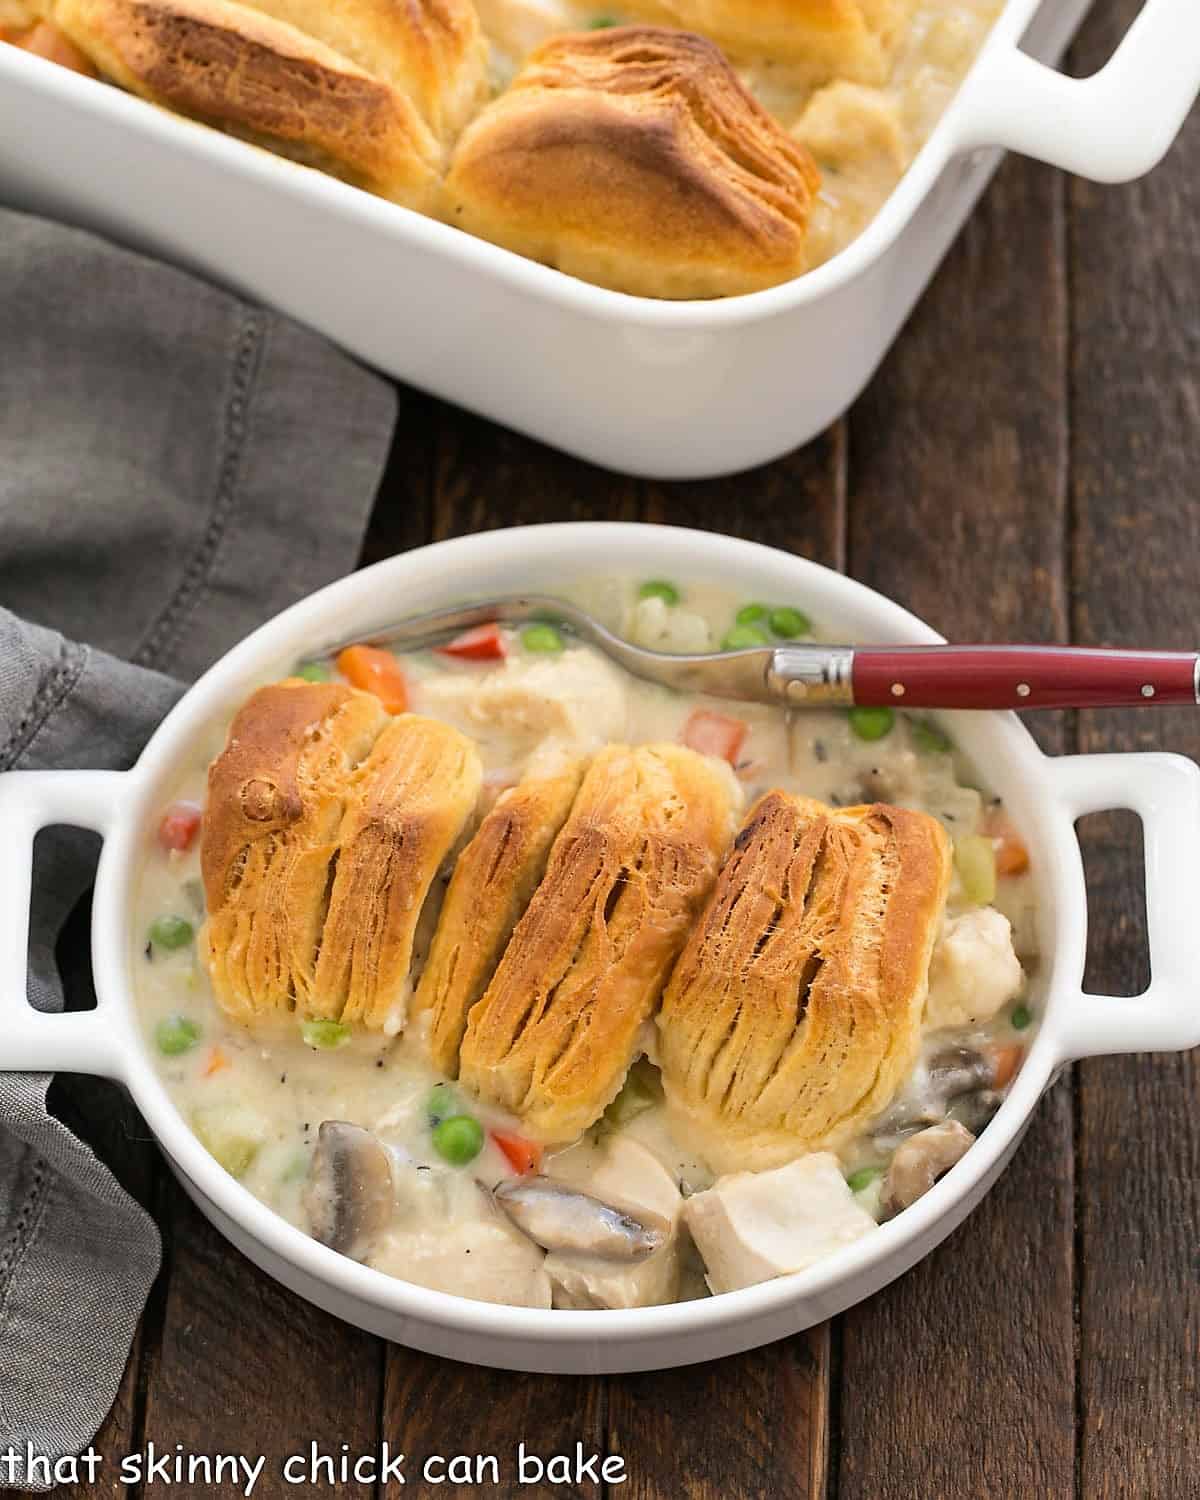 Serving of chicken pot pie in a shallow dish with a red handled fork.